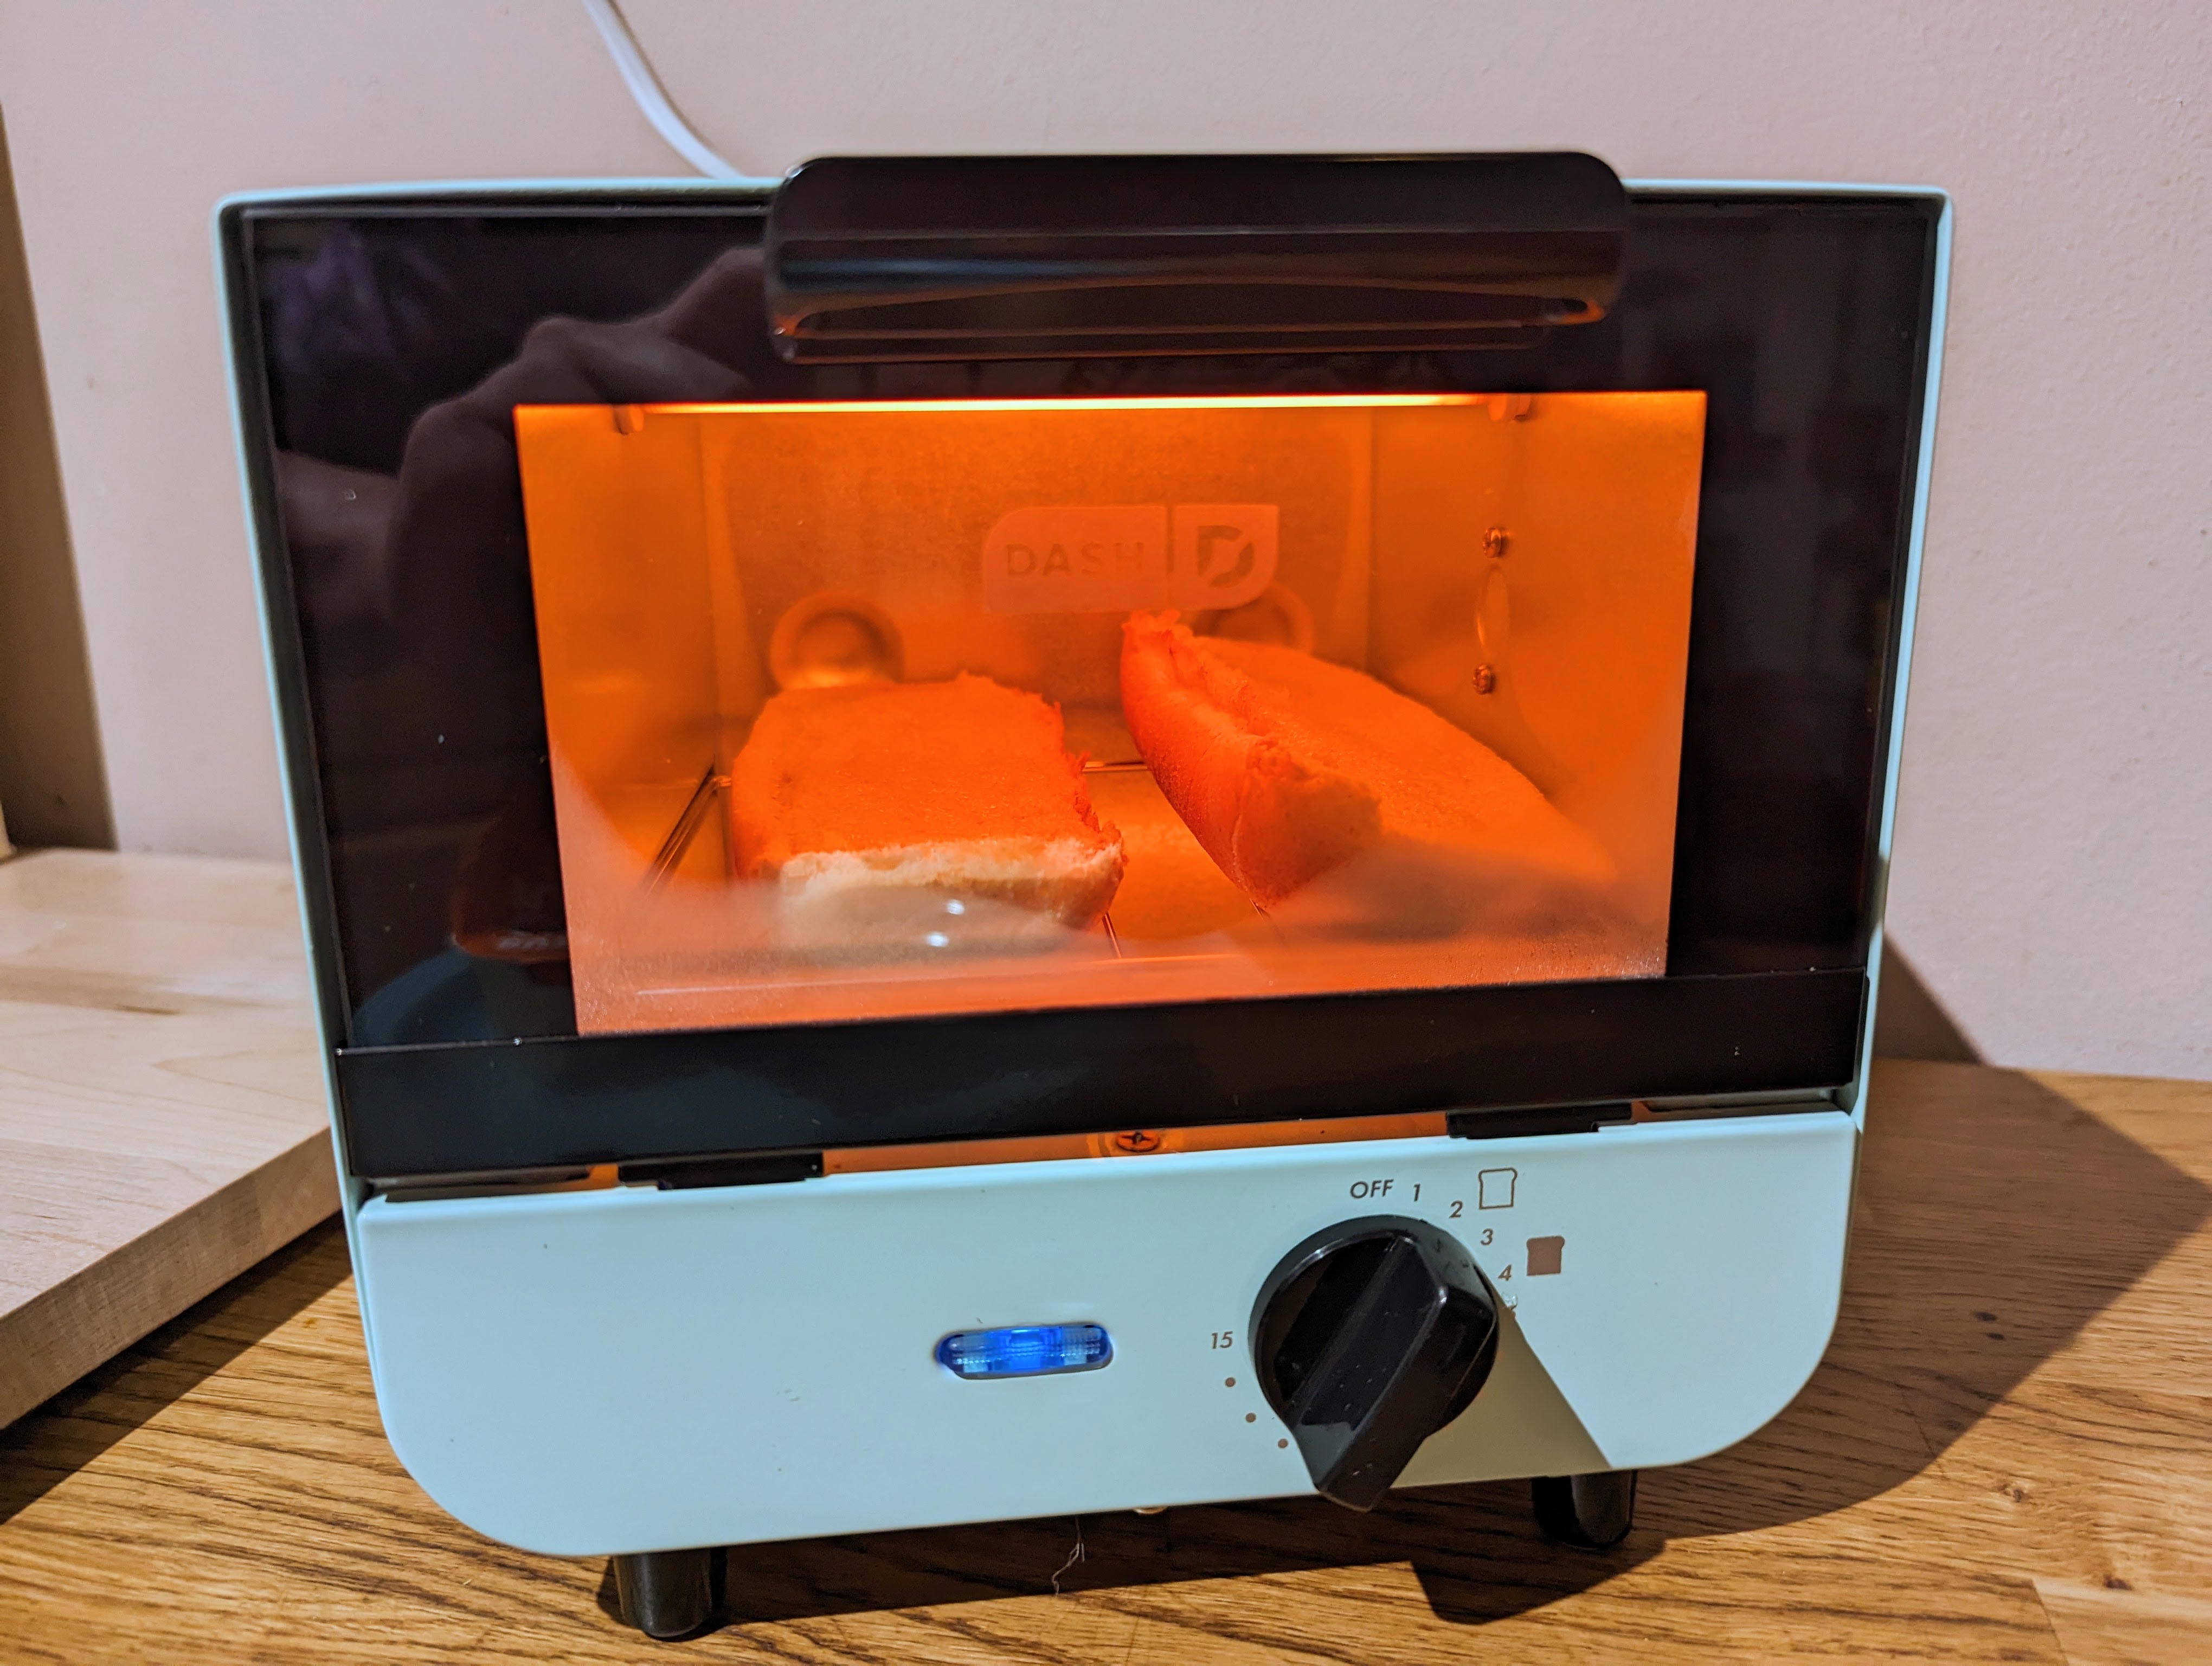 Best Toaster Over For Small Kitchens: DASH Mini Toaster Oven